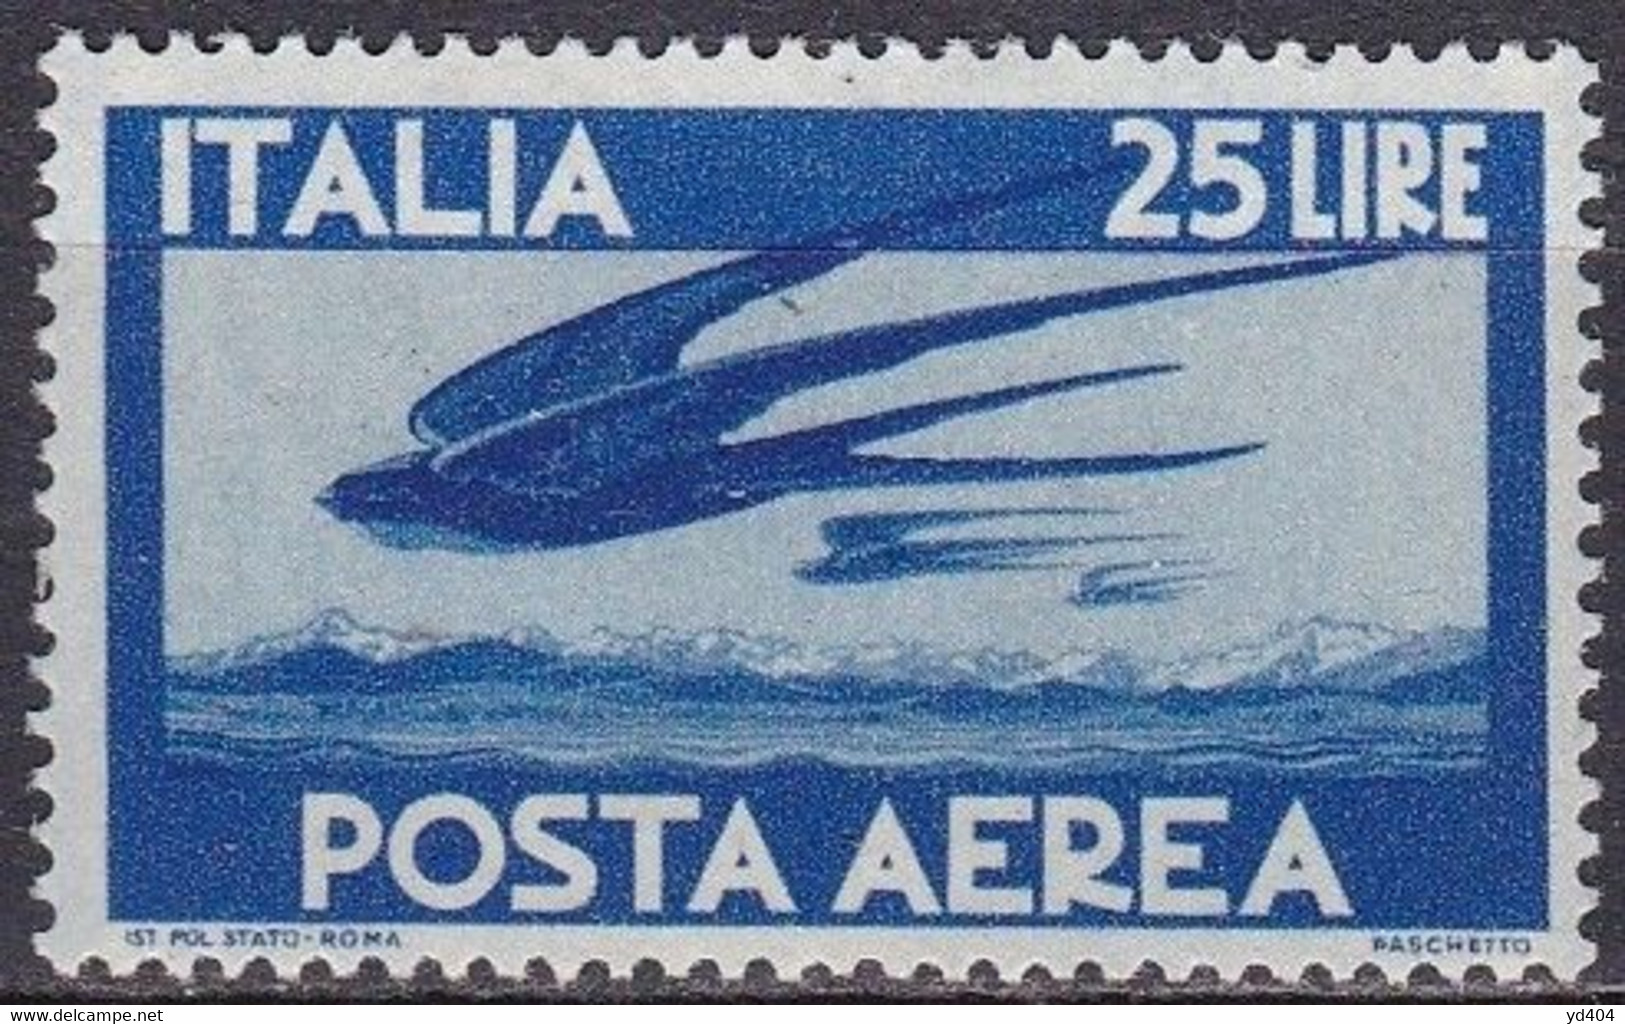 IT124 – ITALY - ITALIE – AIRMAIL – 1947 – CLAPS HANDS & PLANE – Y&T # 118 MVLH 15 € - Correo Aéreo